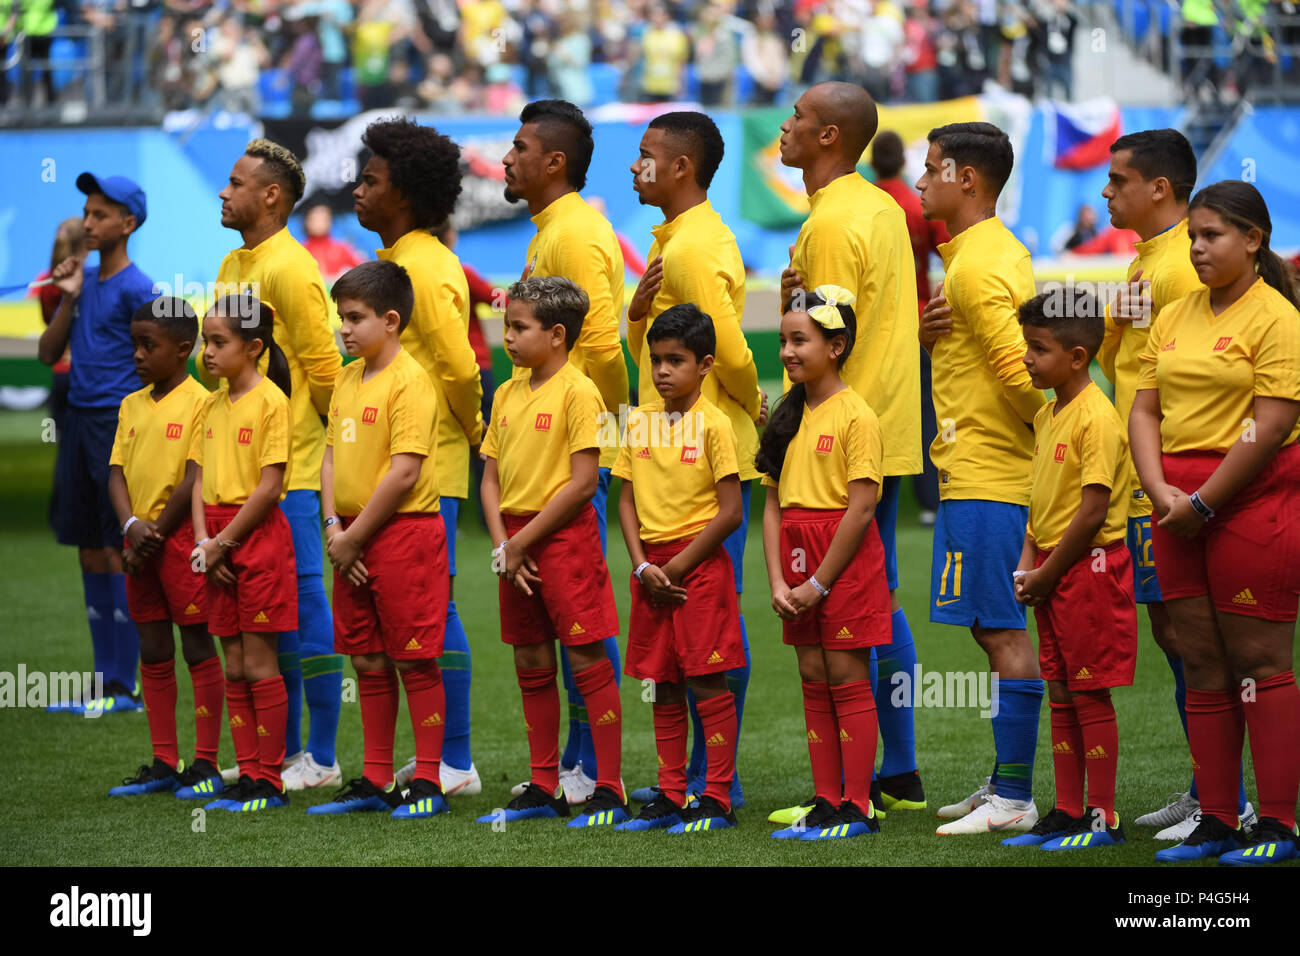 Saint Petersburg, Russia. 22 June 2018. FIFA World Cup Football, Group E, Brazil versus Costa Rica; Brazilian team during their national anthem Credit: Action Plus Sports Images/Alamy Live News Stock Photo